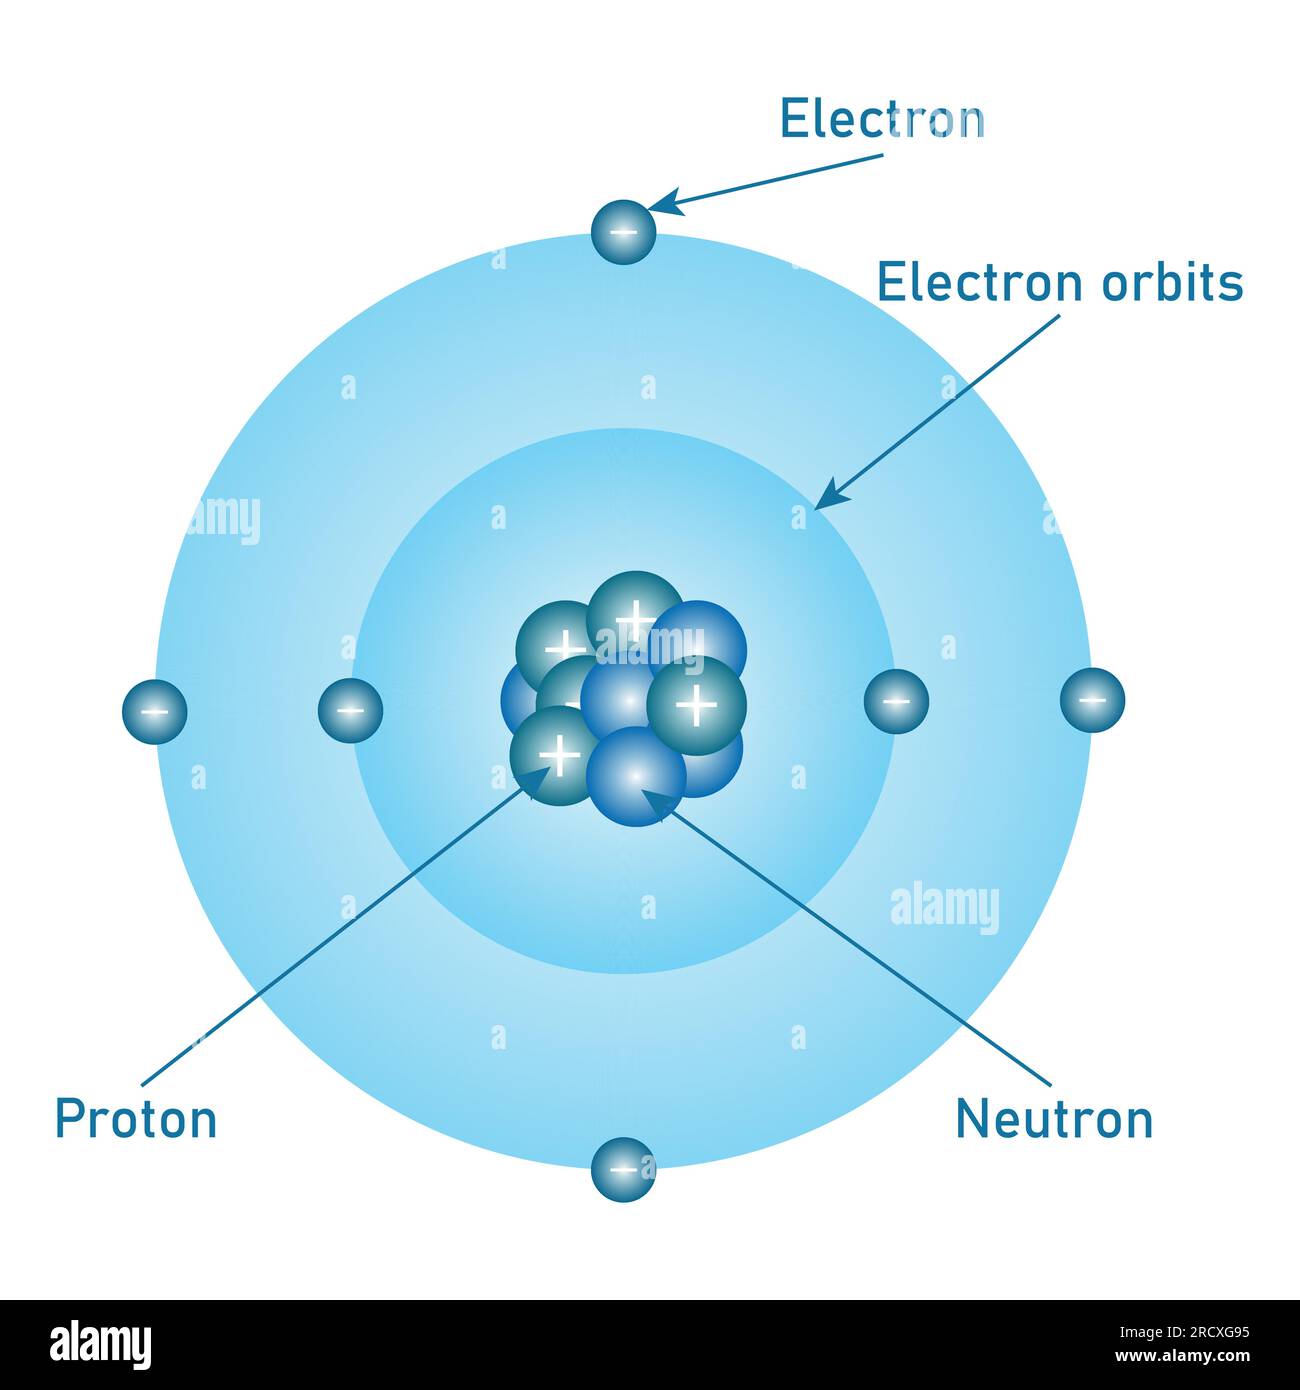 Bohr atomic model of atom. Proton, neutron, electron and electron orbits. Atomic structure model. Vector illustration isolated on white background. Stock Vector